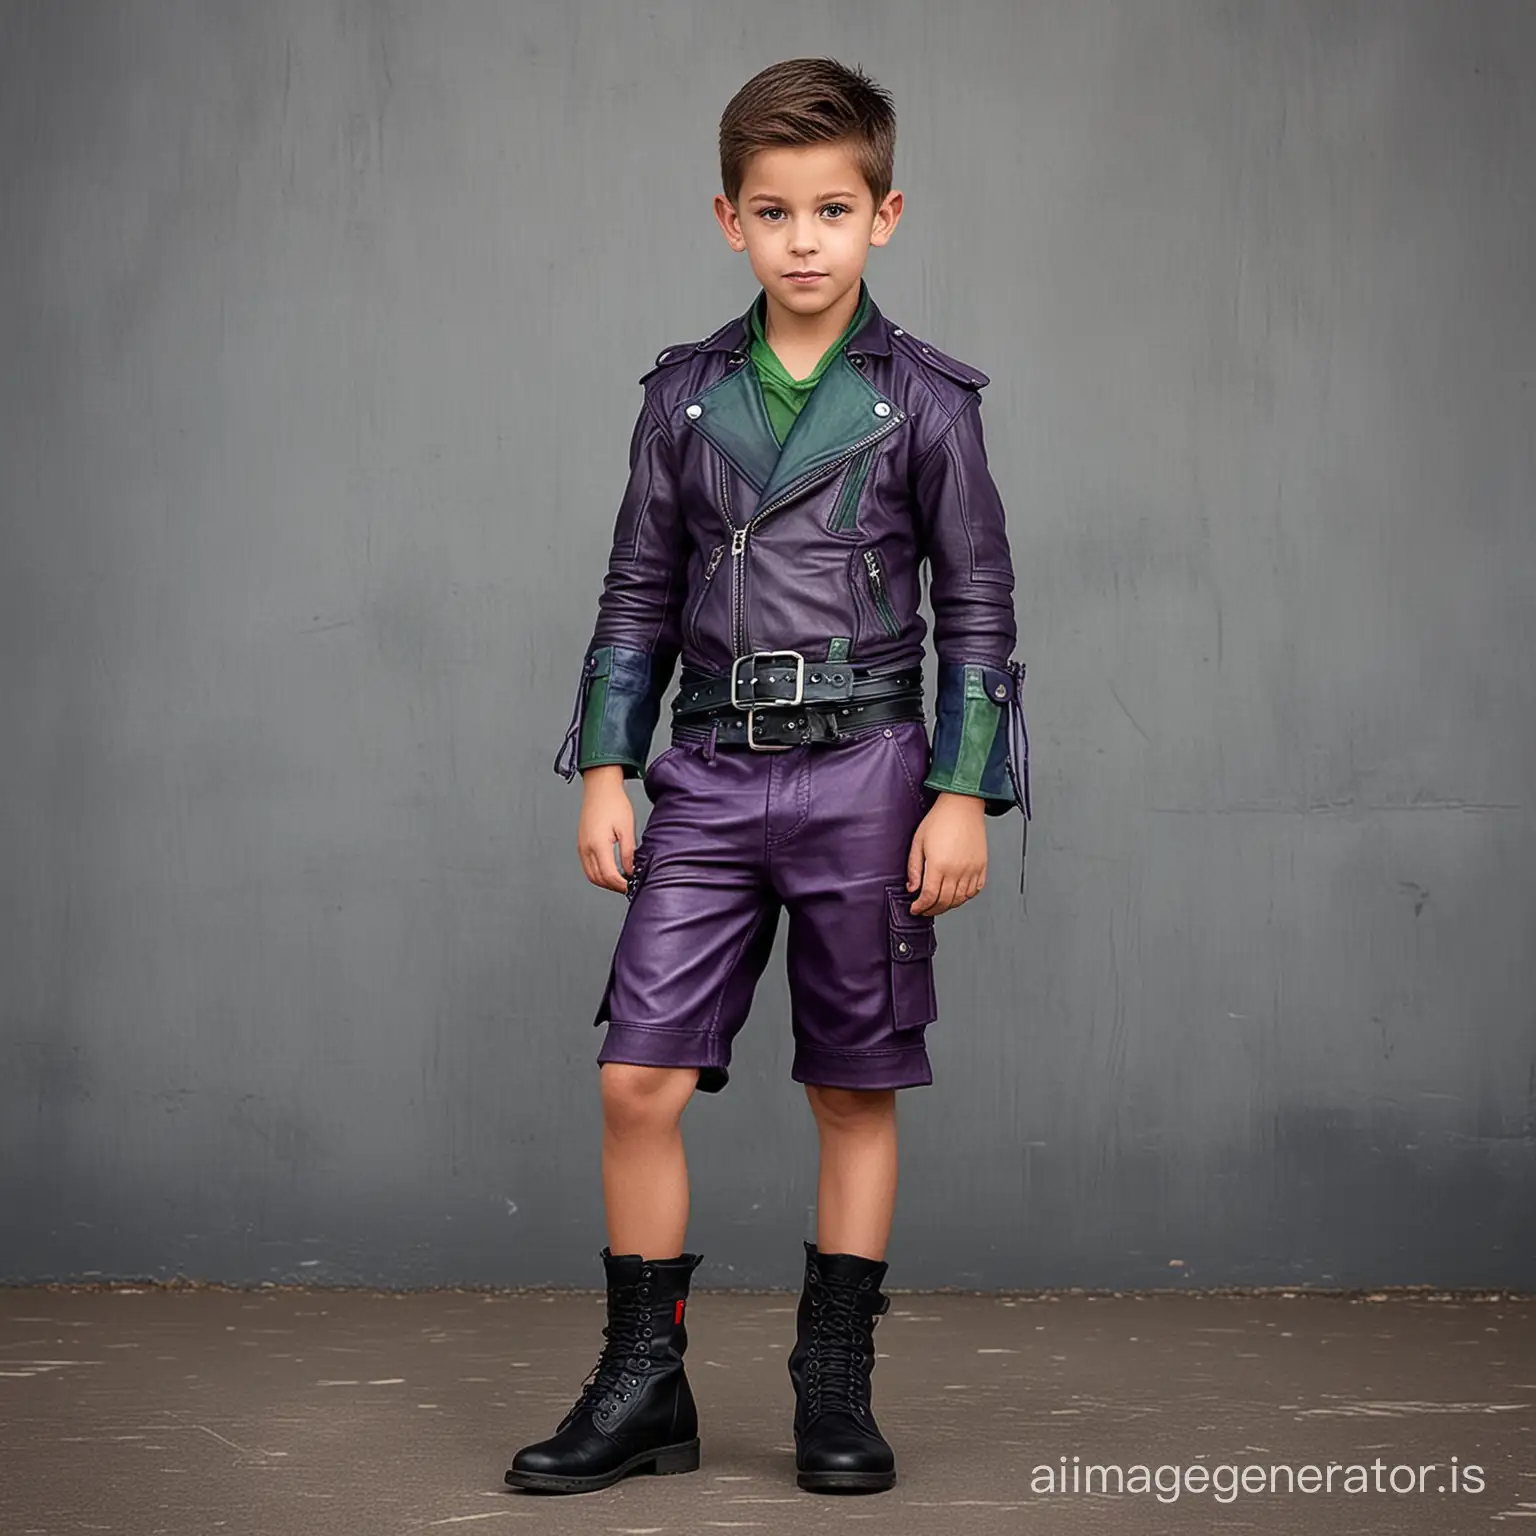 Create a villain outfit for a strong 8 year old boy villain with abs, cool, wicked, leather, shorts, comfortable yet intimidating, various shades of purple and green with hints of red and blue